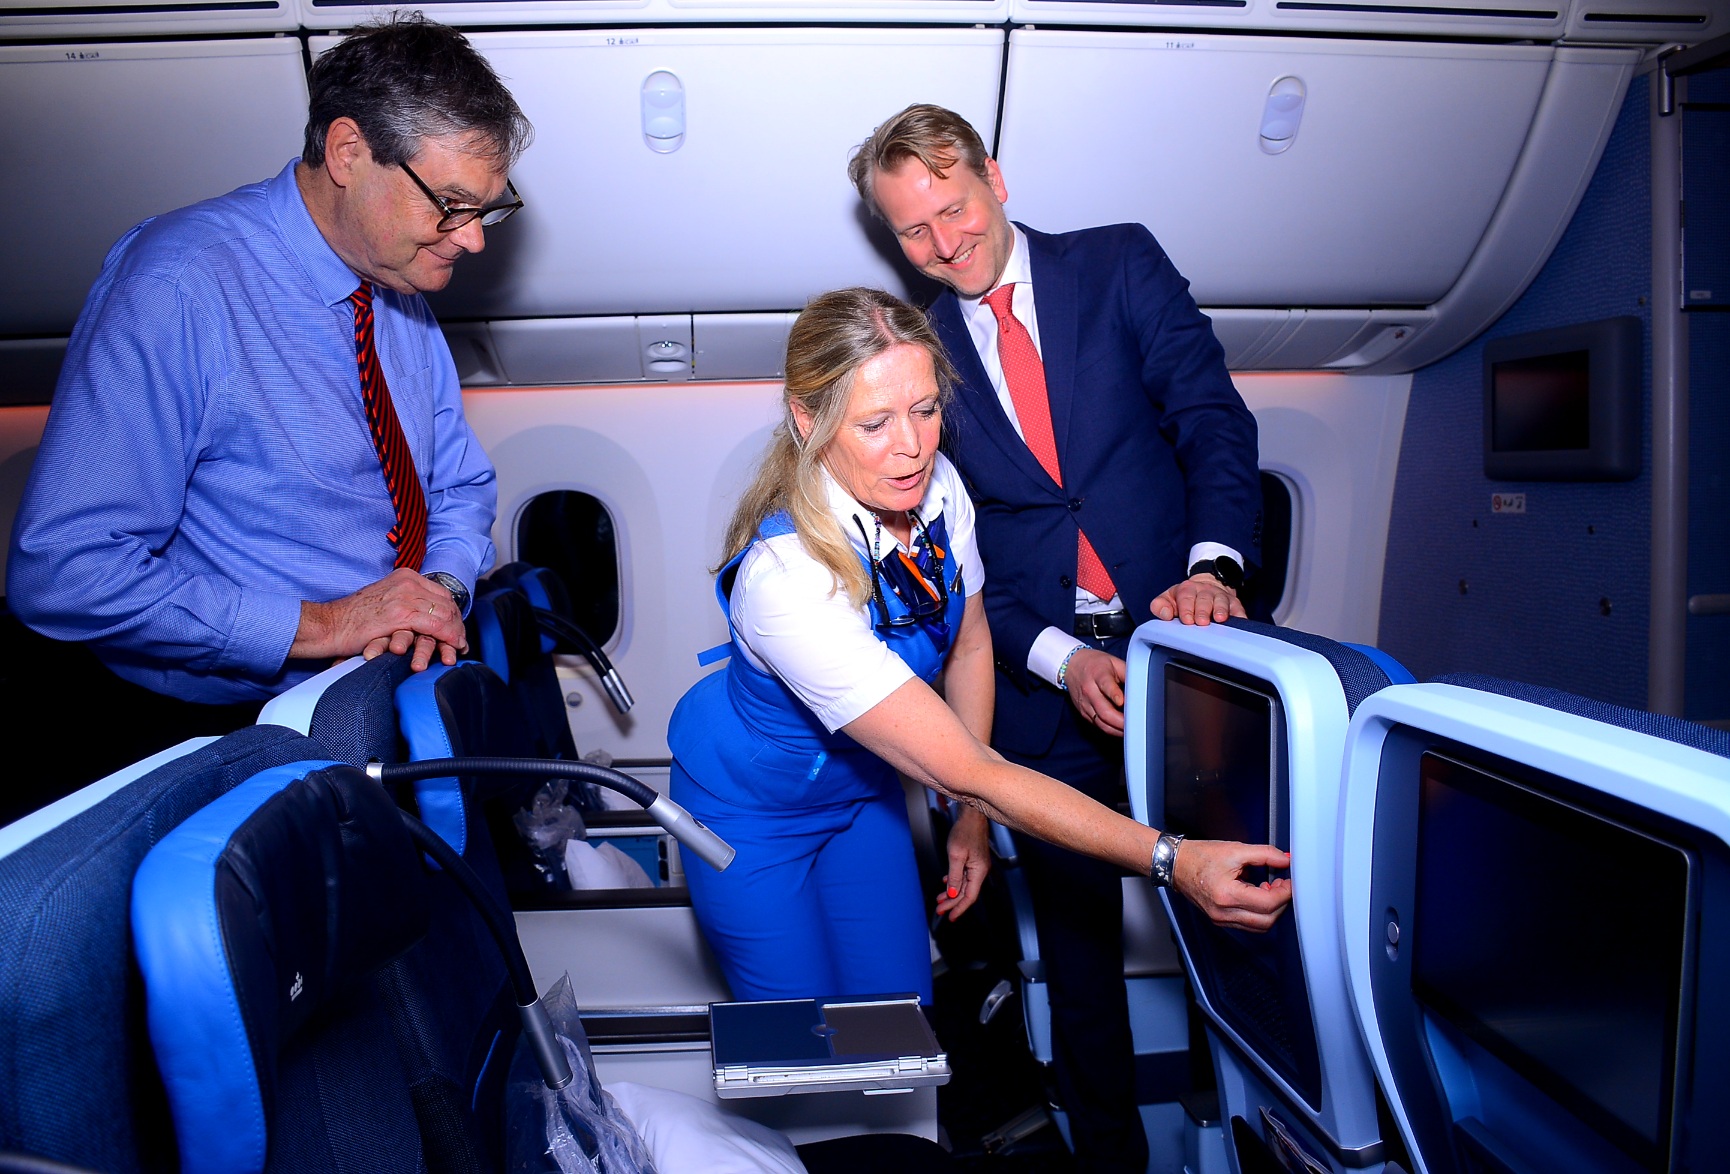 (L-R) AirFrance-KLM Regional Station Mr. Manager Peter Ordeman keenly watches as AirFrance- KLM Flight Purser Femke Legssen explains features of the new premium comfort cabin installed on all Boeing 777 and 787 aircraft flying to international destinations. Built In between economy class and business class, the new cabin is targeted at customers who want to enjoy the luxury of flying comfortably. Looking on is Air France-KLM General Manager for East and Southern Africa, Nigeria, and Ghana Mr. Marius van der Ham.